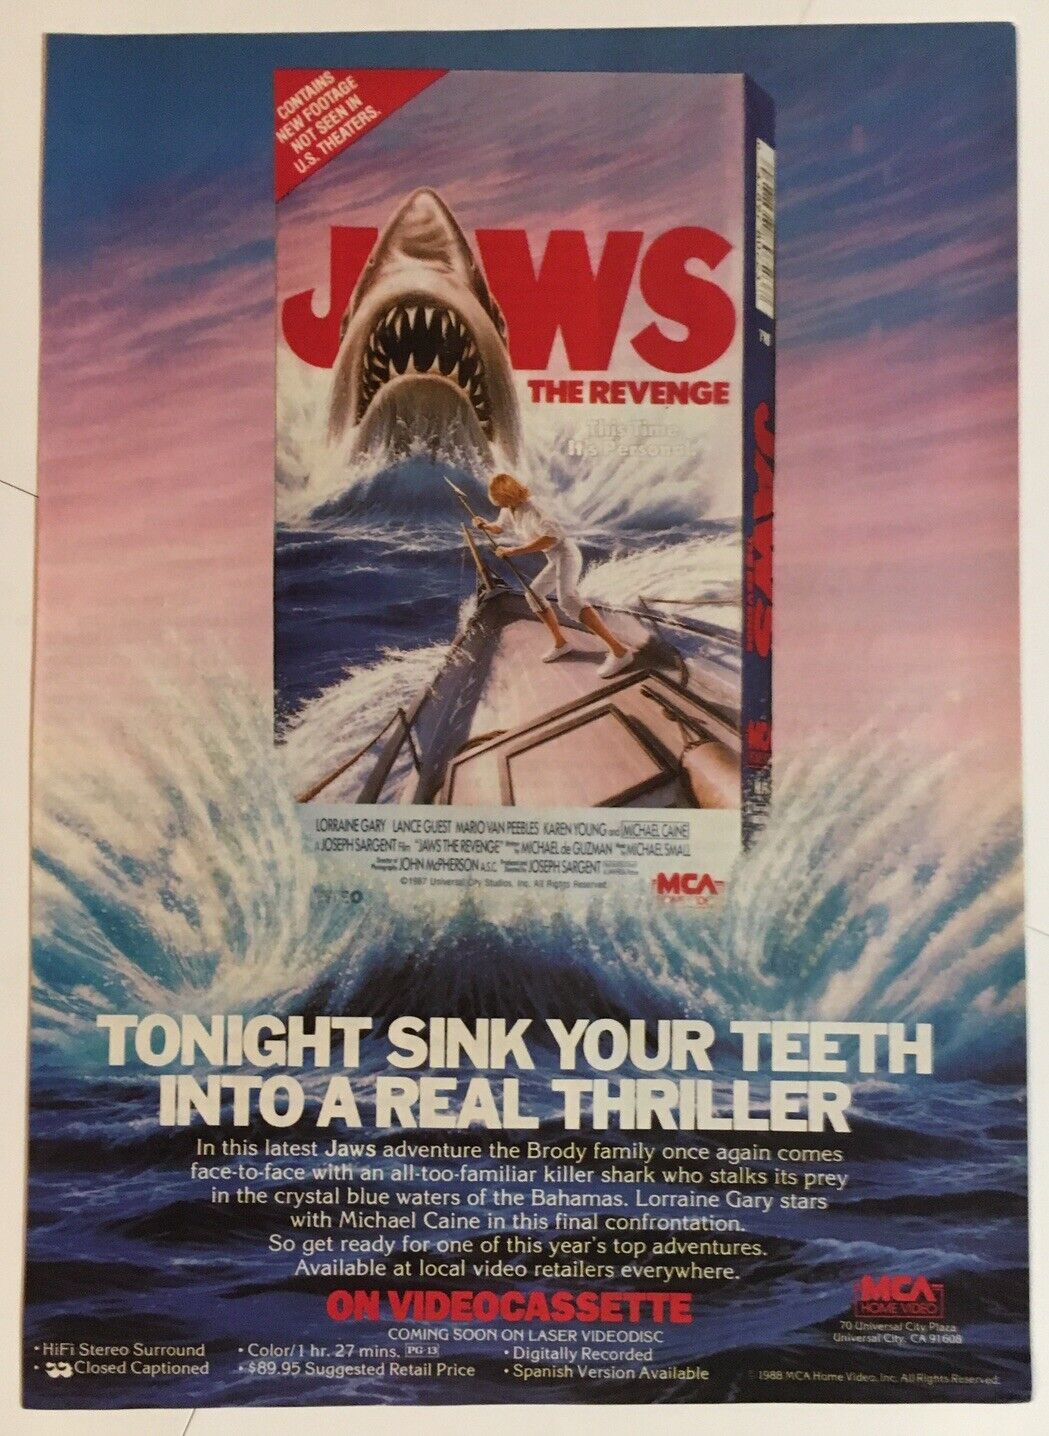 Jaws The Revenge 1988 Vintage Print Ad 7.5x10.5 Inches Wall Decor